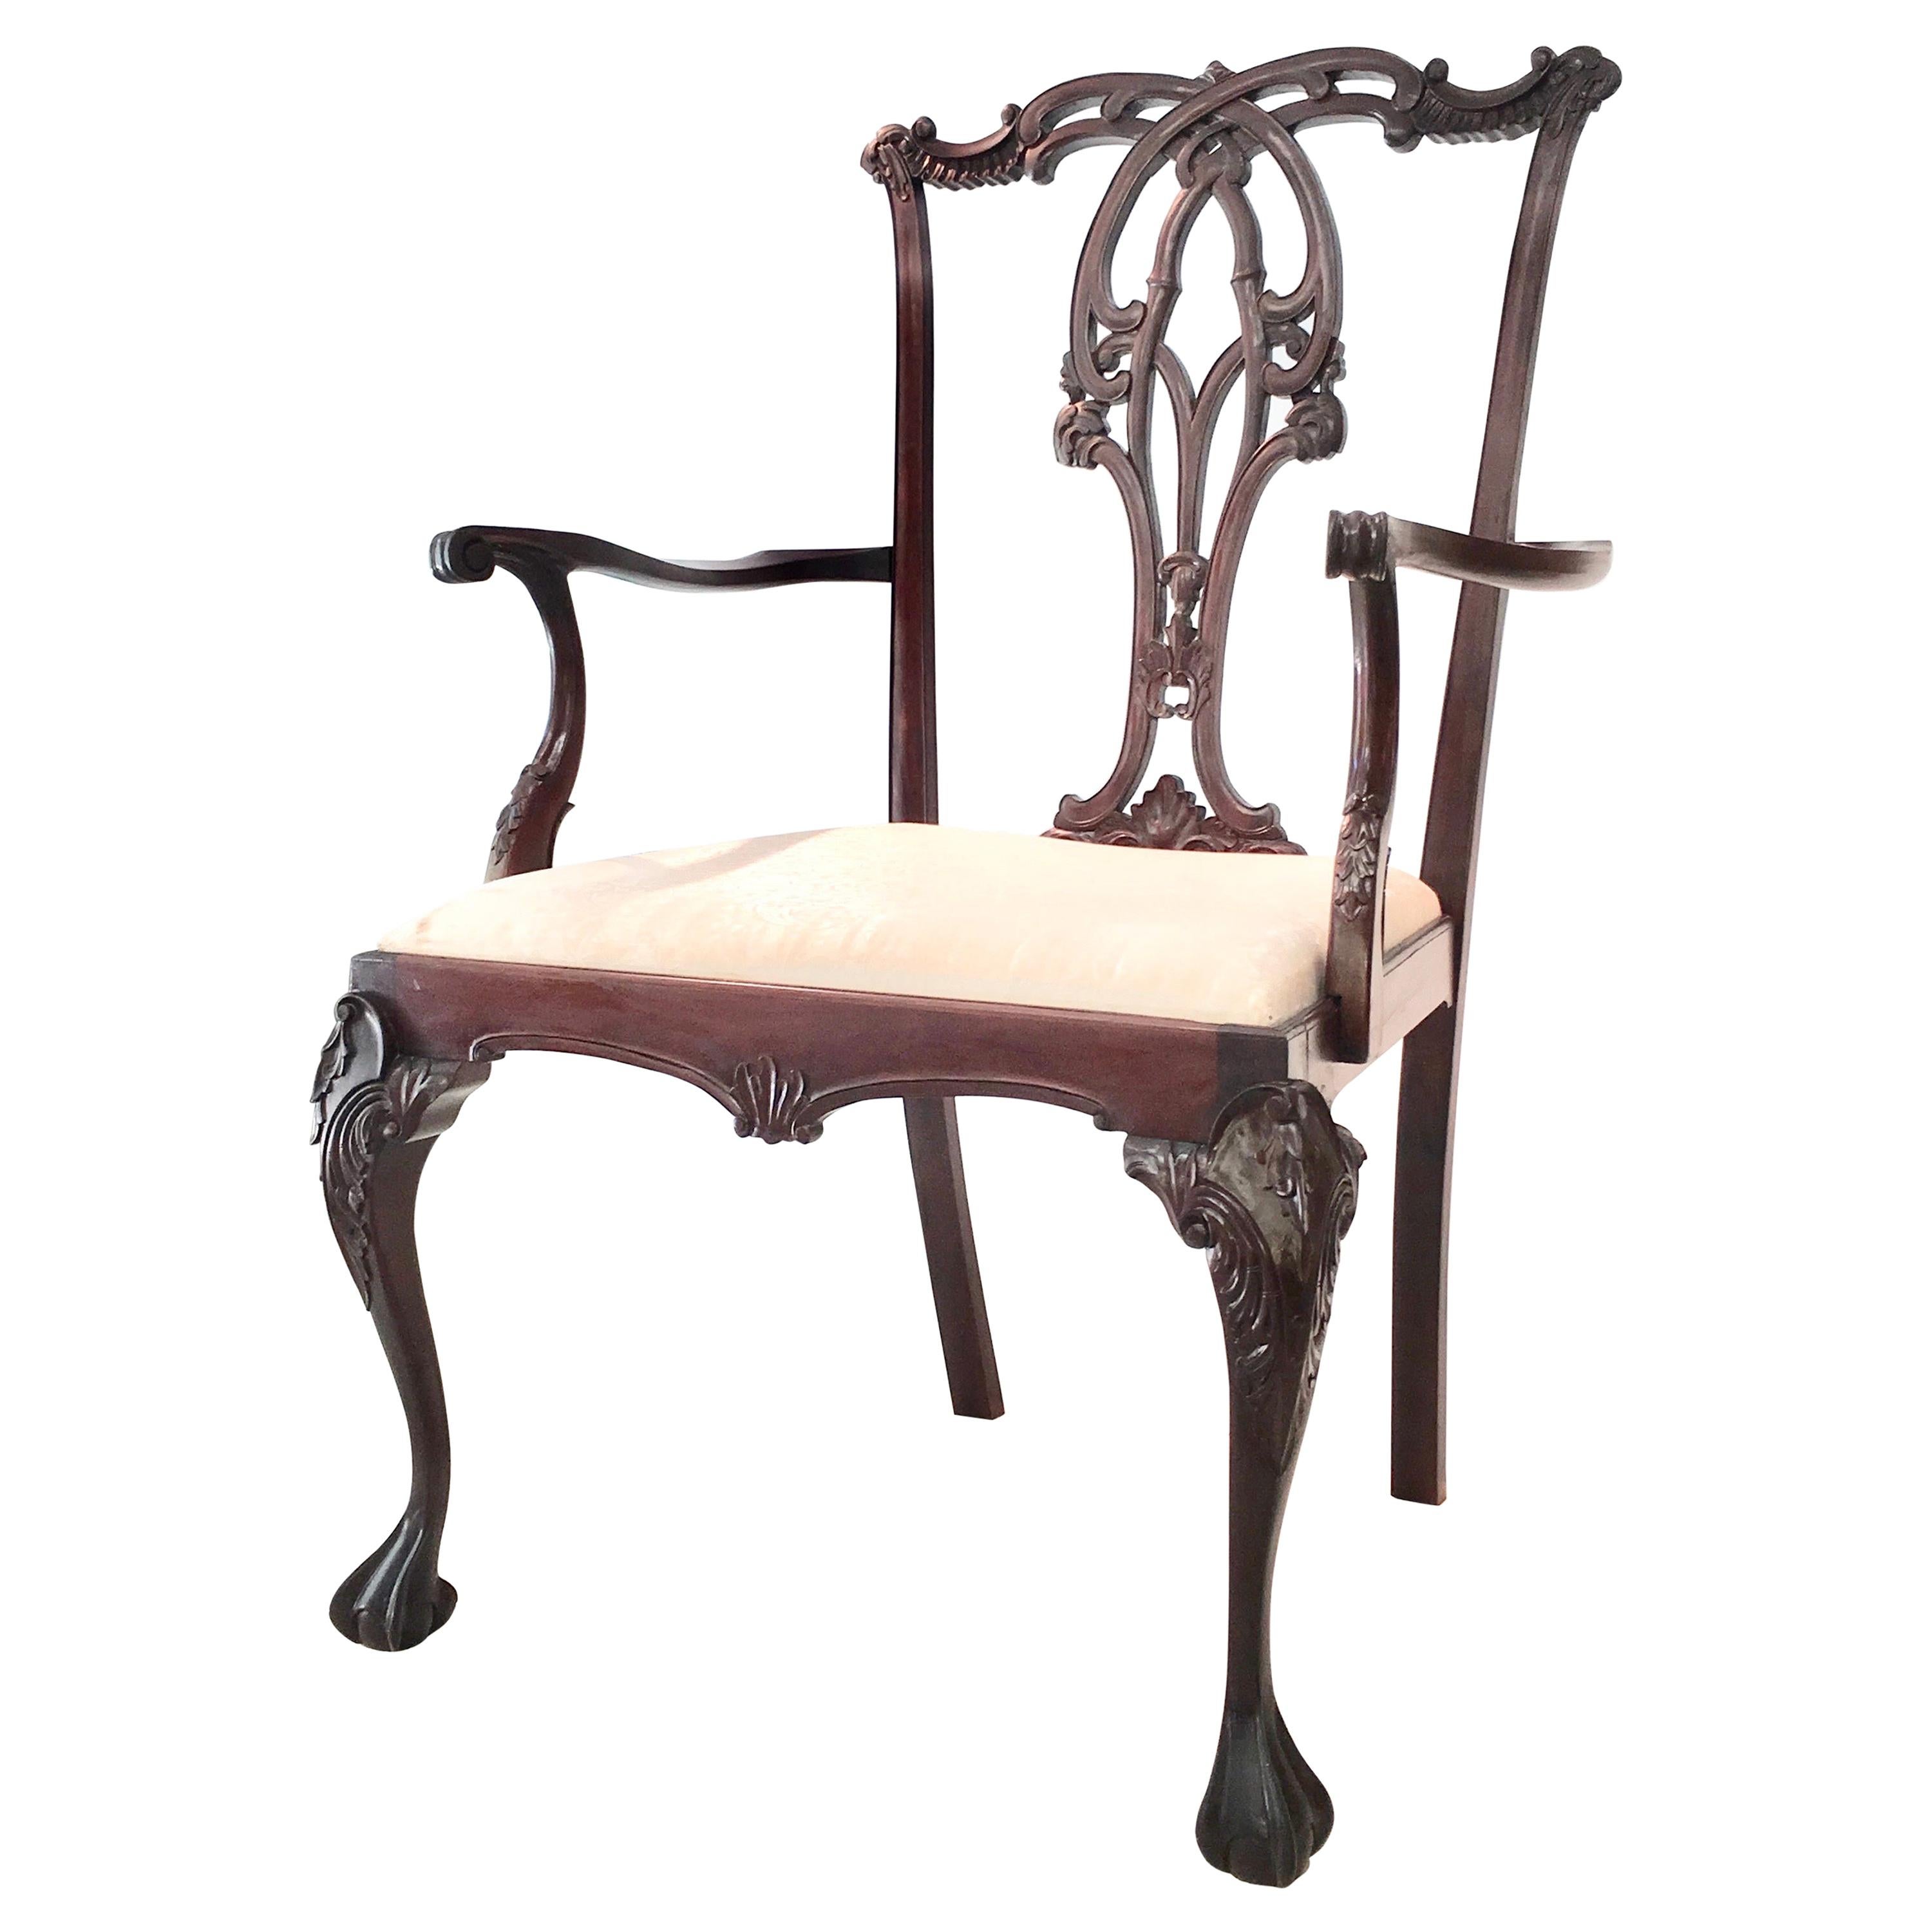 Novelty "World's Largest" Chippendale Chair